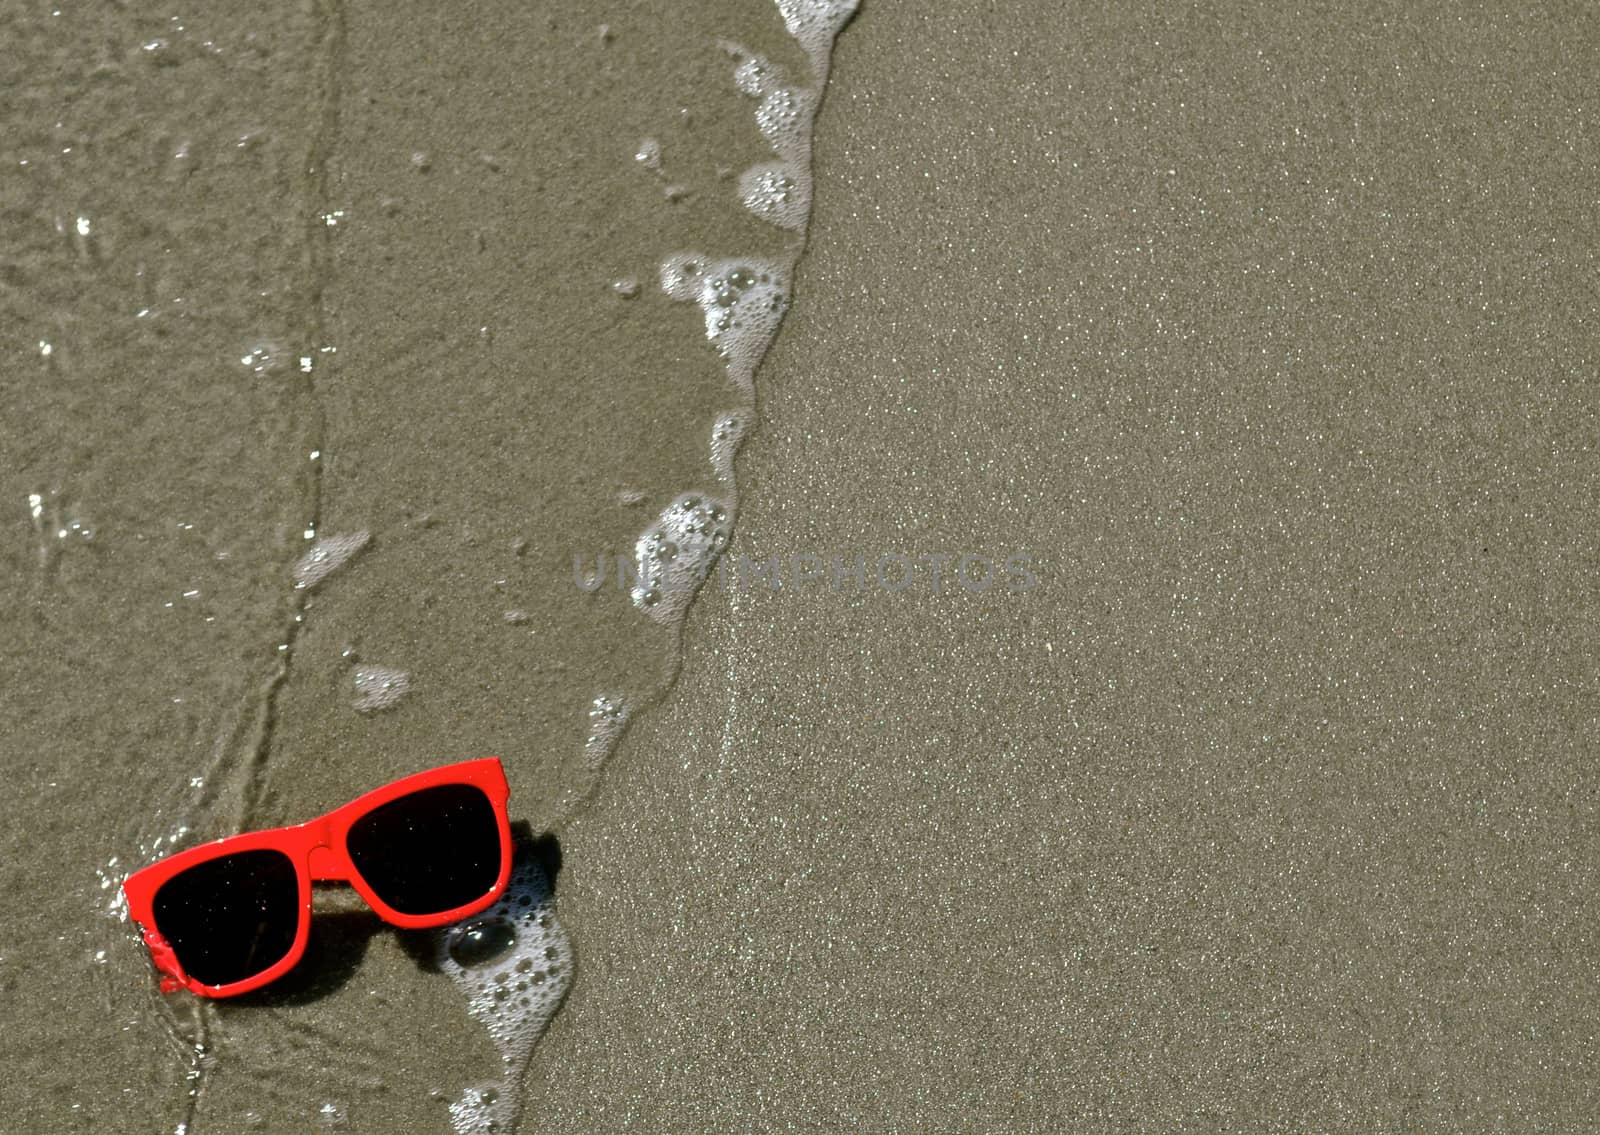 In the Sand - Sunglasses
